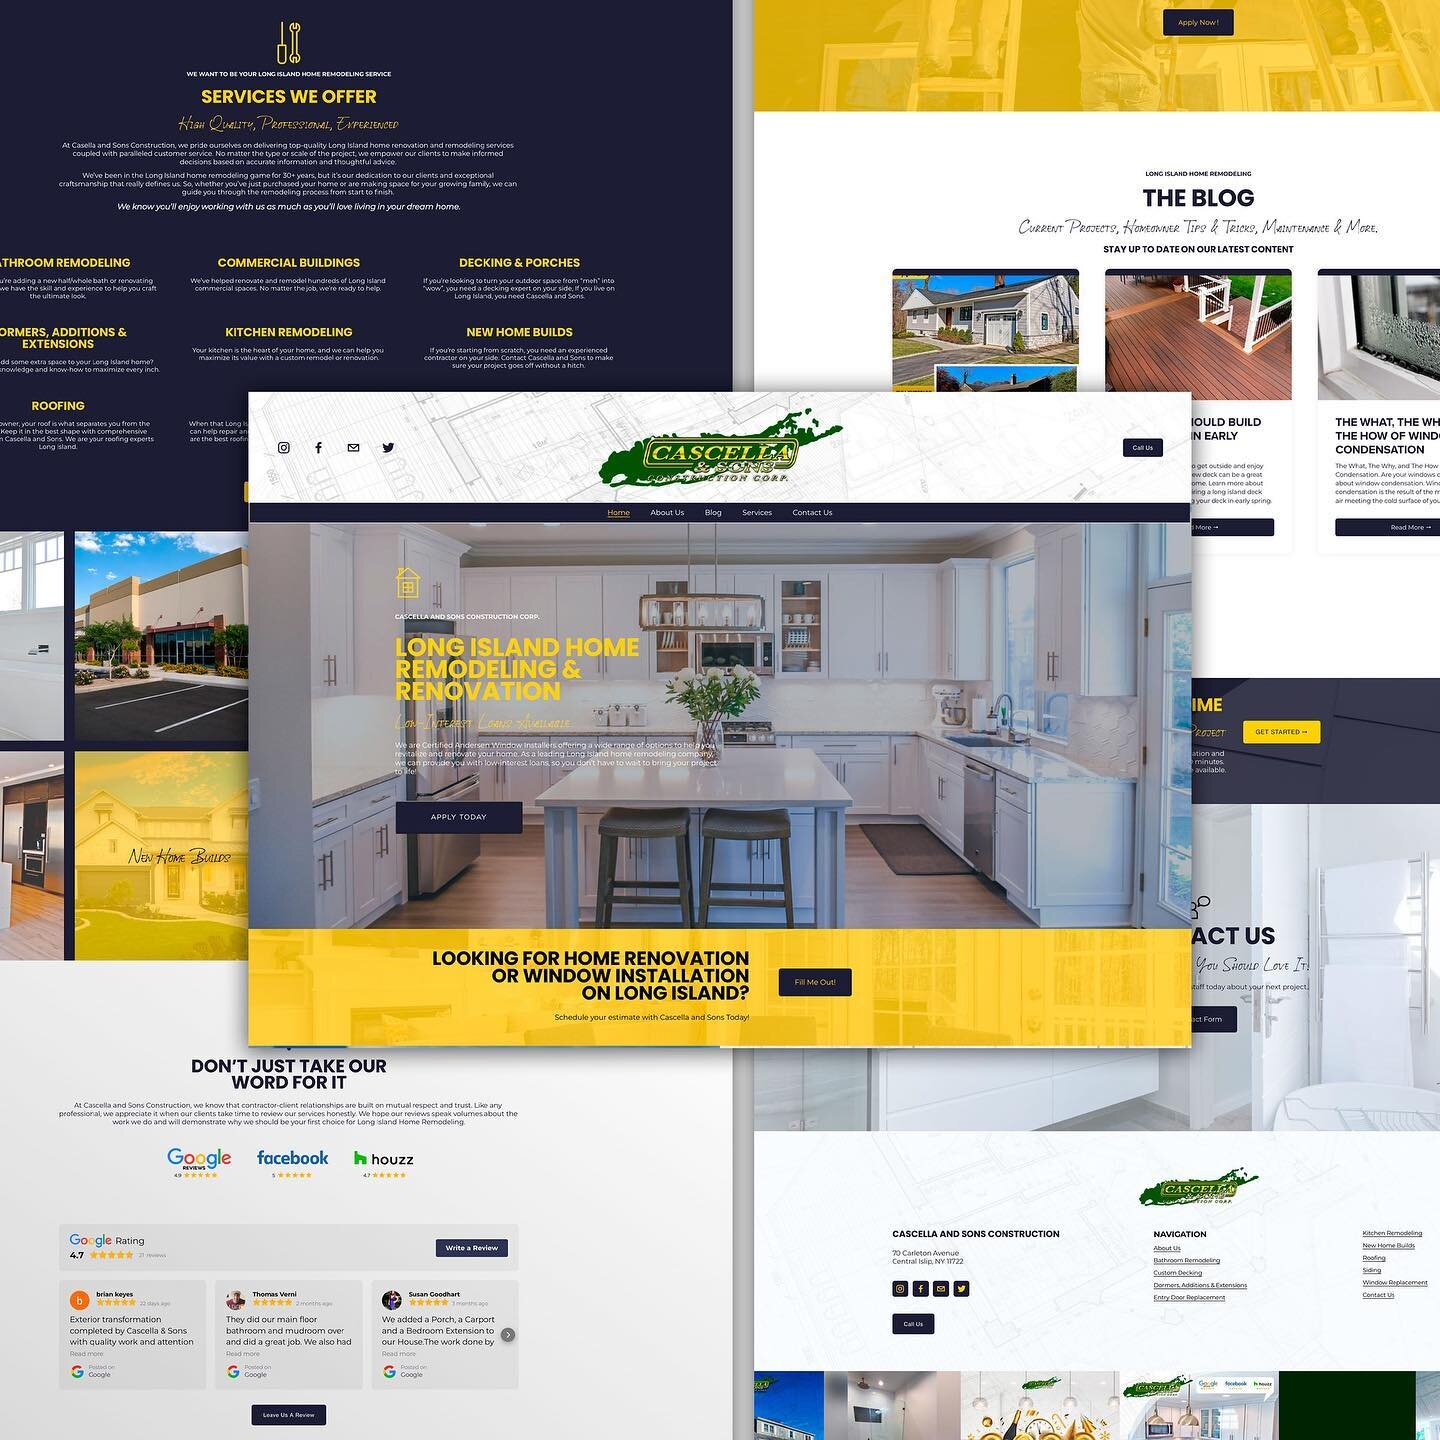 Home Remodeling Website 🏡

We are your full-service website design company, specializing in customer websites for small to medium-sized businesses. We create an engaging user experience that is responsive across all devices and integrated seamlessly